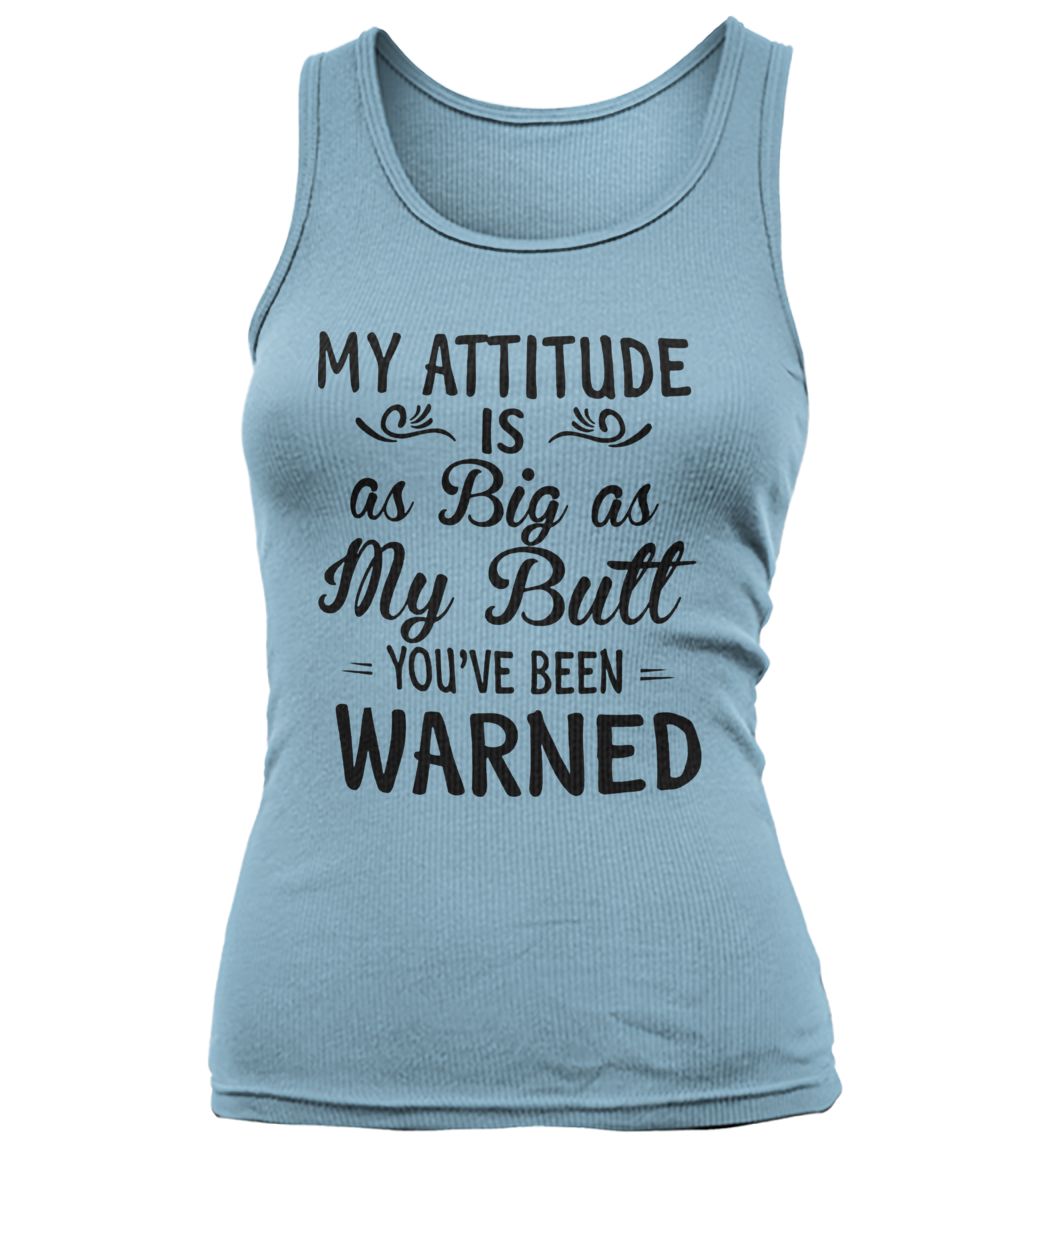 My attitude is as big as my butt you've been warned women's tank top